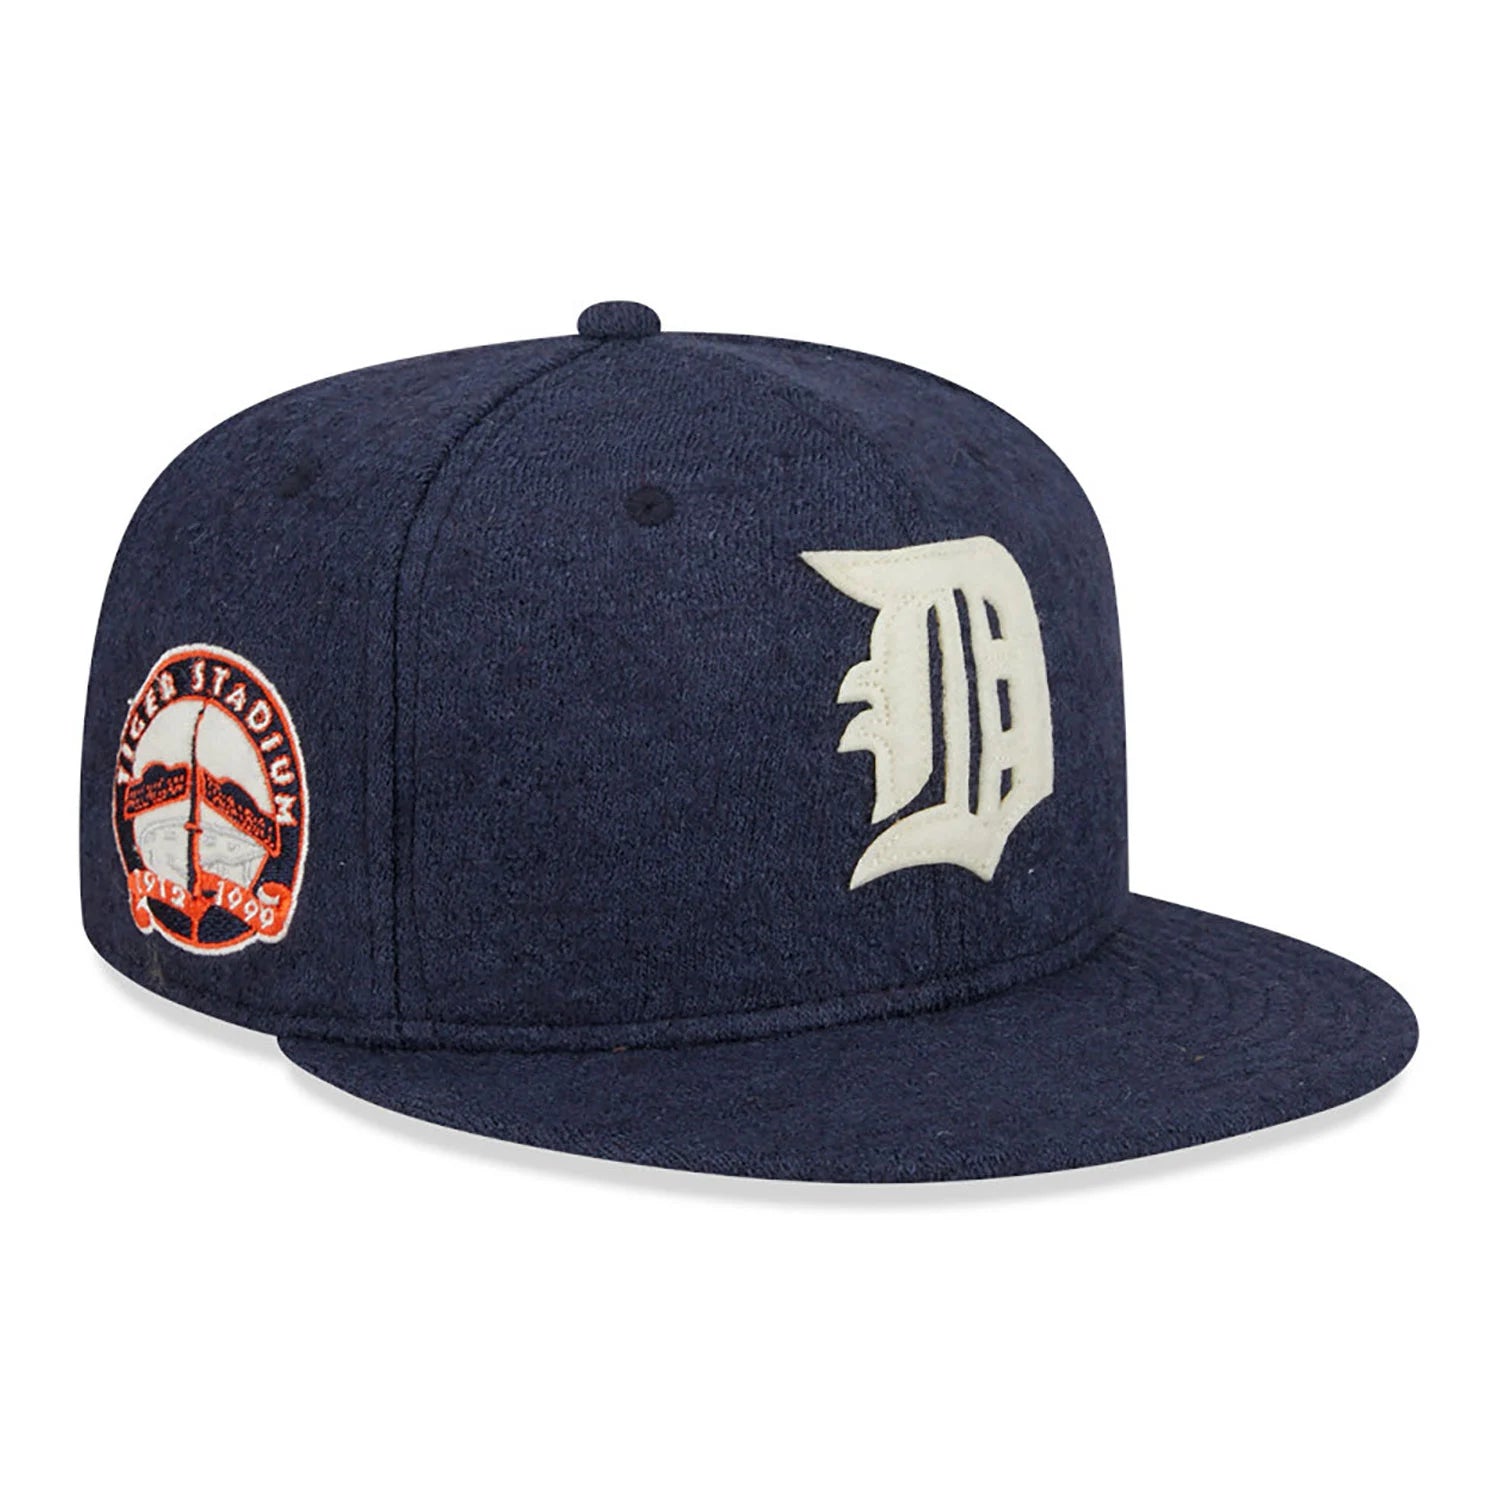 NEW ERA 59FIFTY MLB DETROIT TIGERS TIGER STADIUM NAVY FITTED CAP